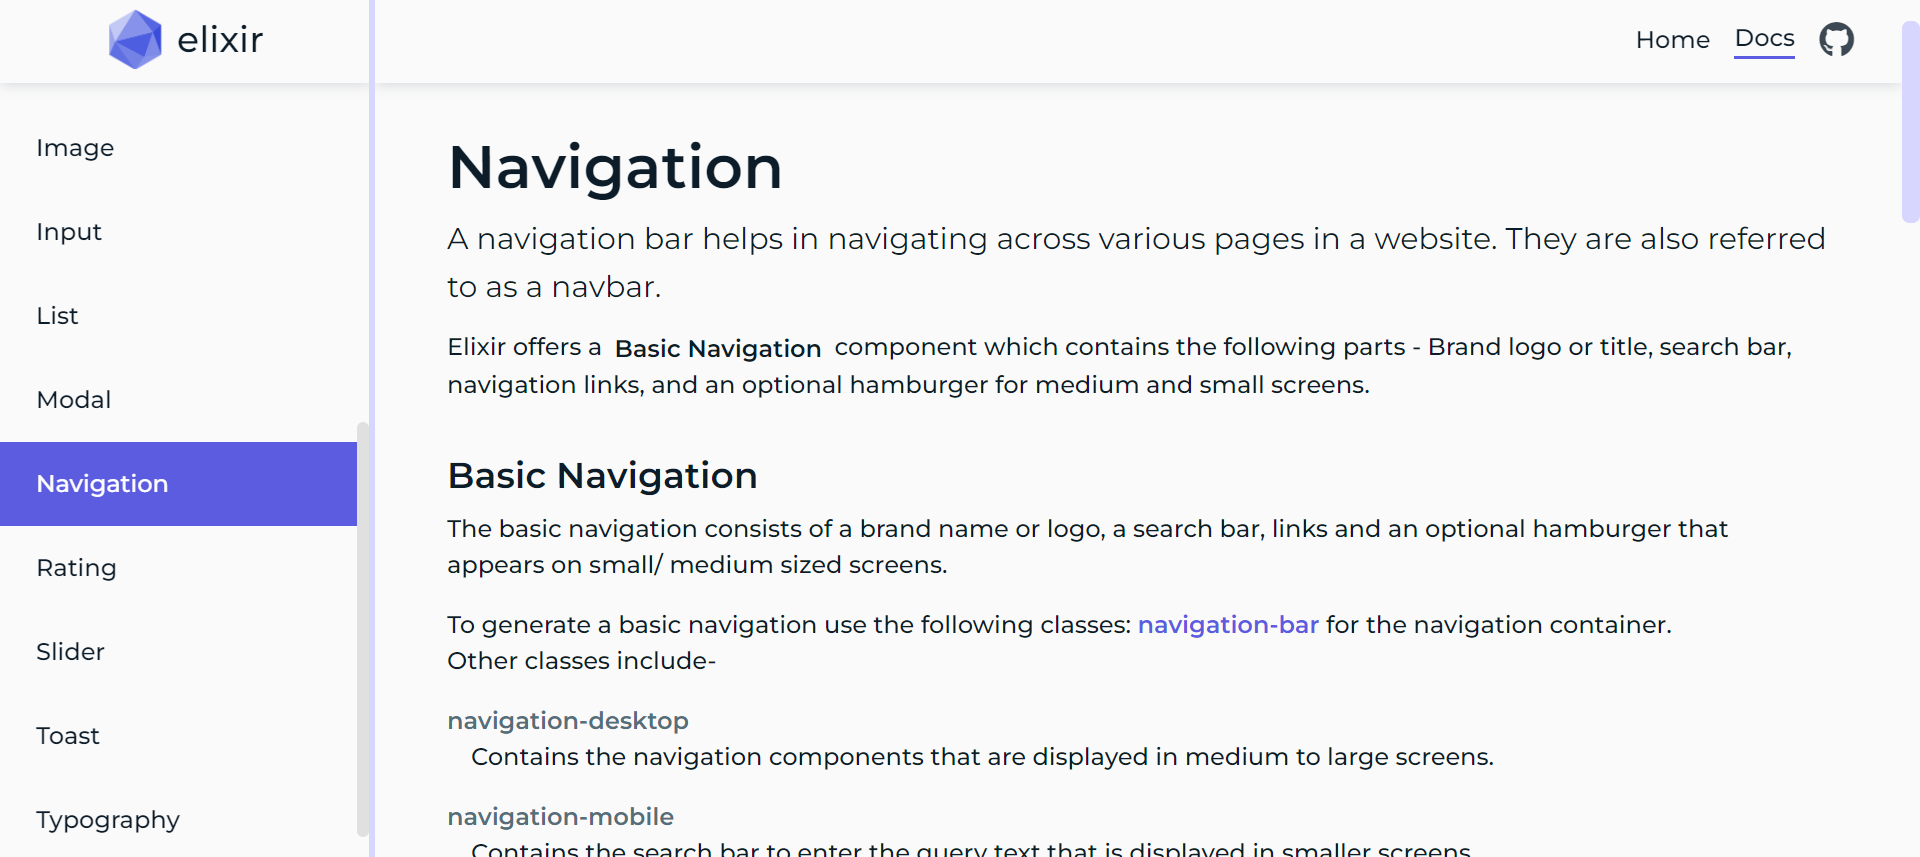 Screenshot of Navigation component in the documentation page